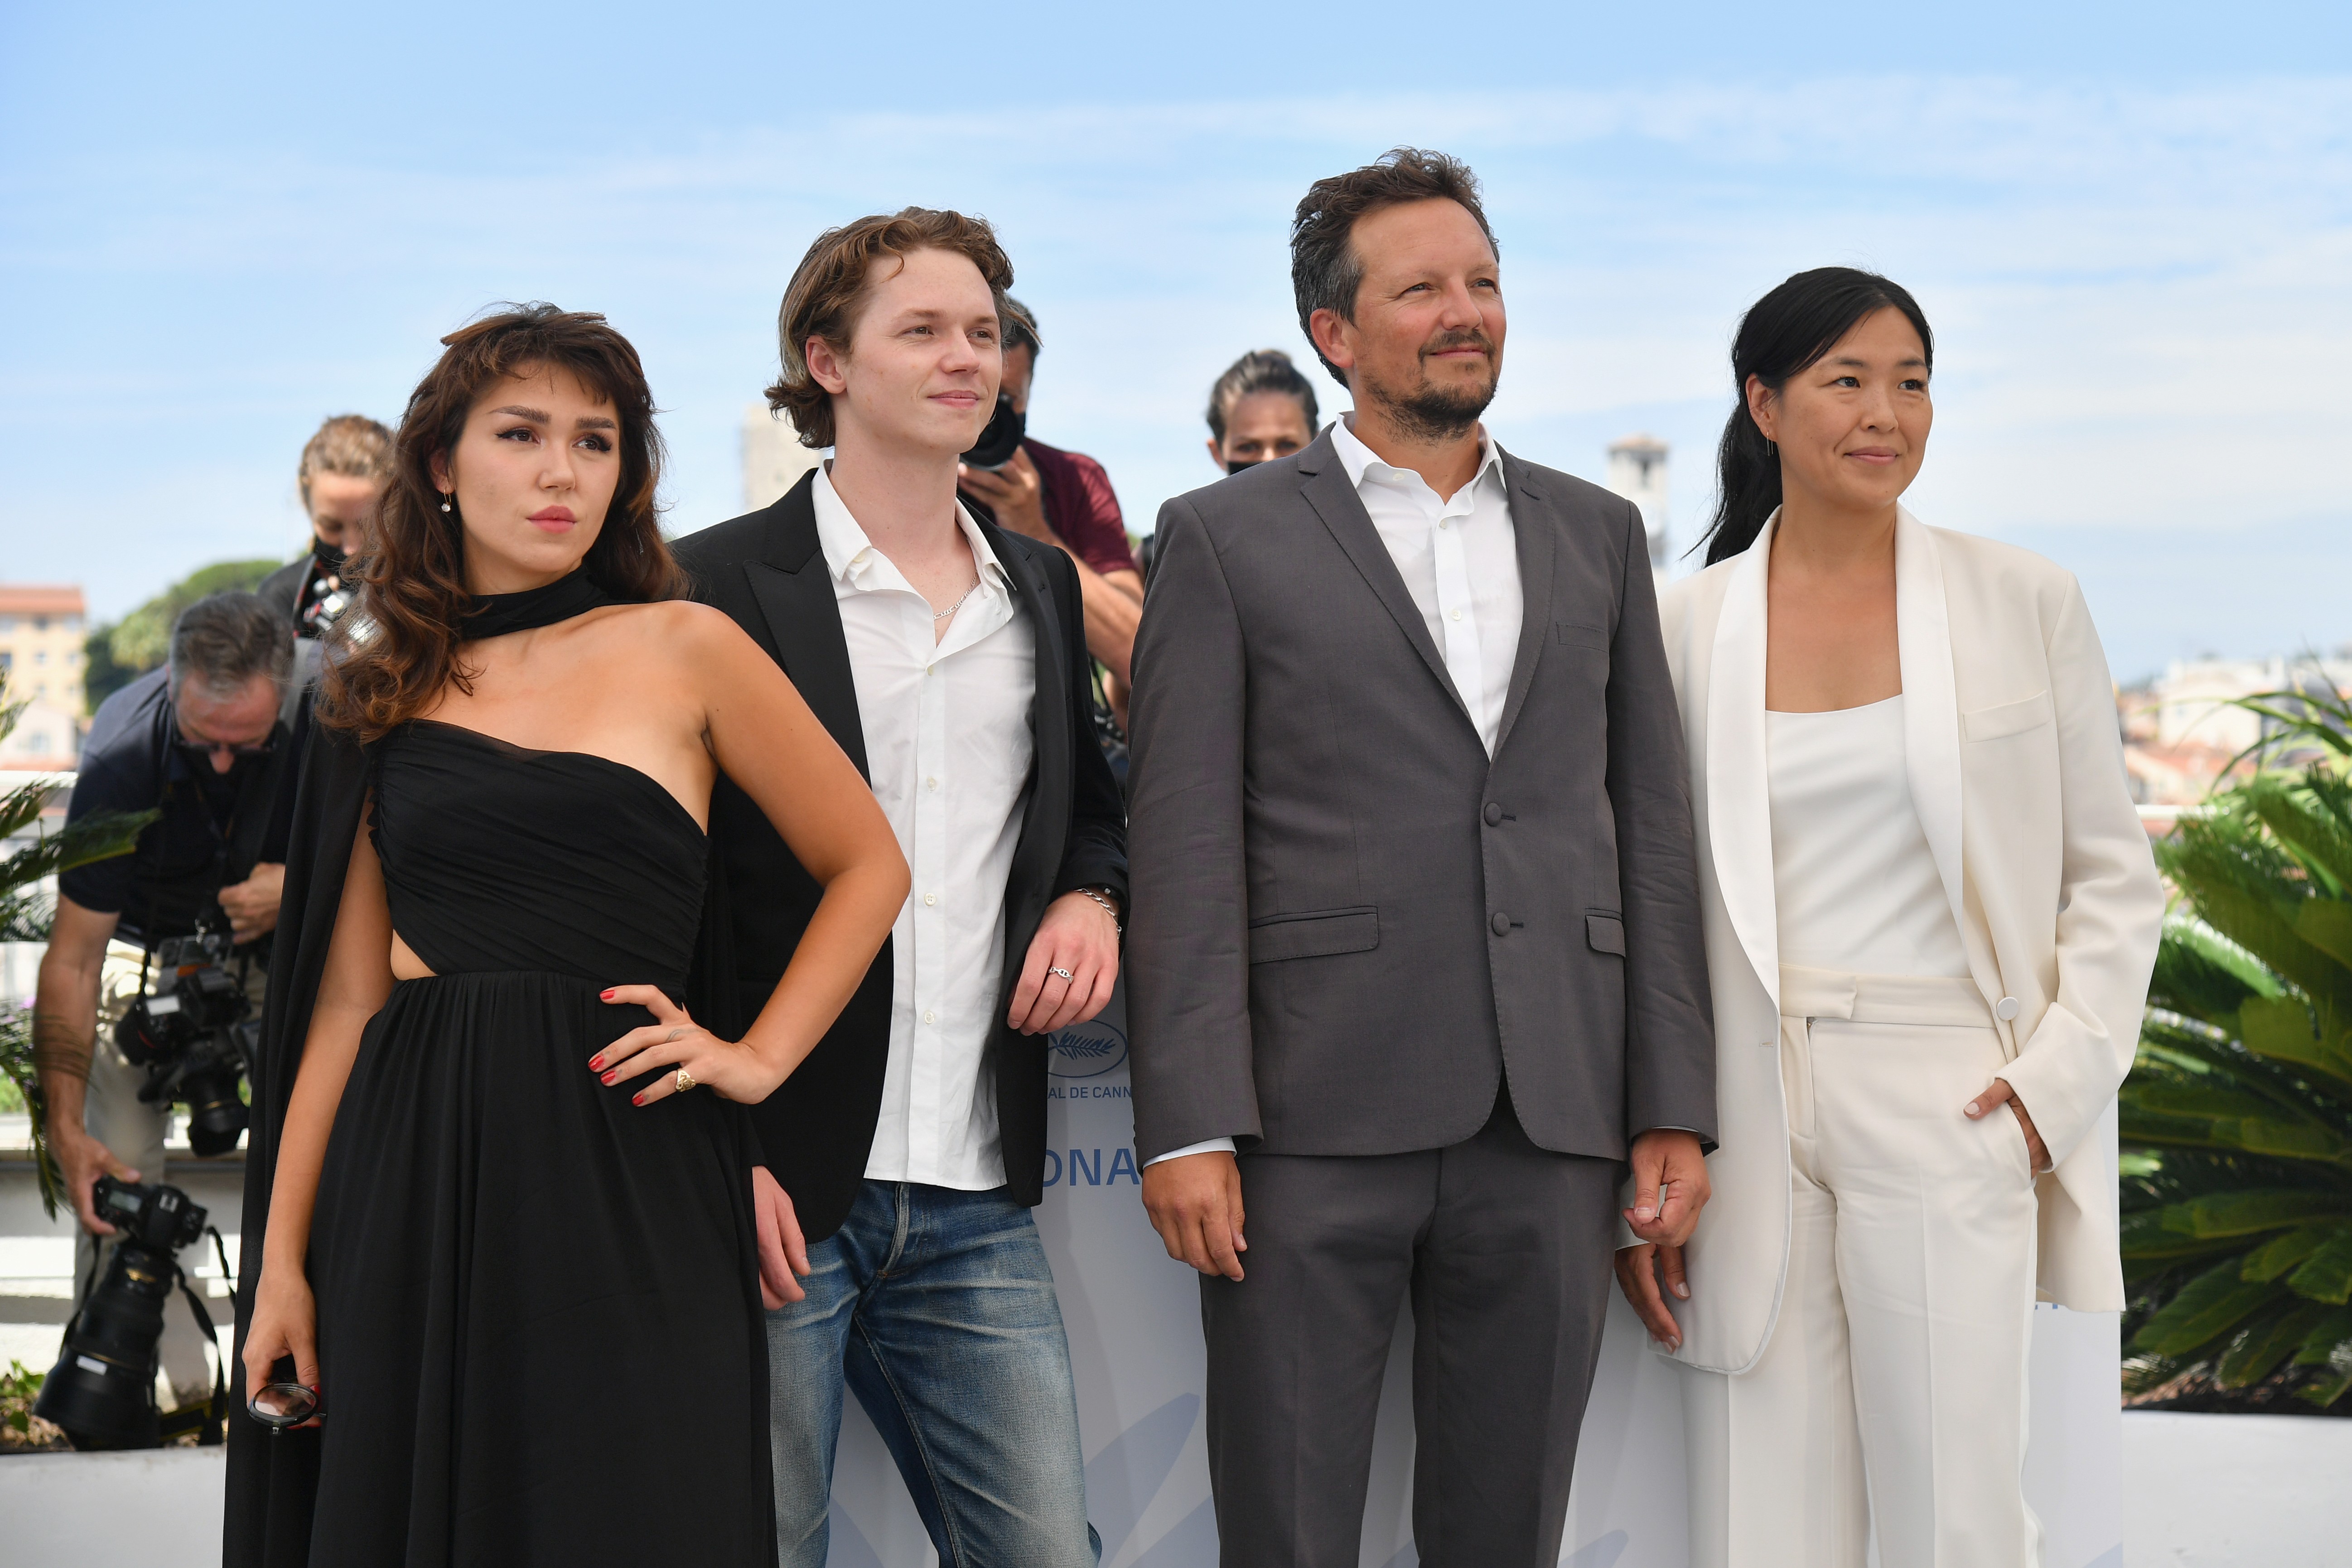 CANNES, FRANCE - JULY 07:  Mercedes Kilmer, Jack Kilmer, Director Leo Scott and Director Ting Poo attends "Val" photocall during the 74th annual Cannes Film Festival on July 07, 2021 in Cannes, France. (Photo by Dominique Charriau/WireImage) (Foto: WireImage)